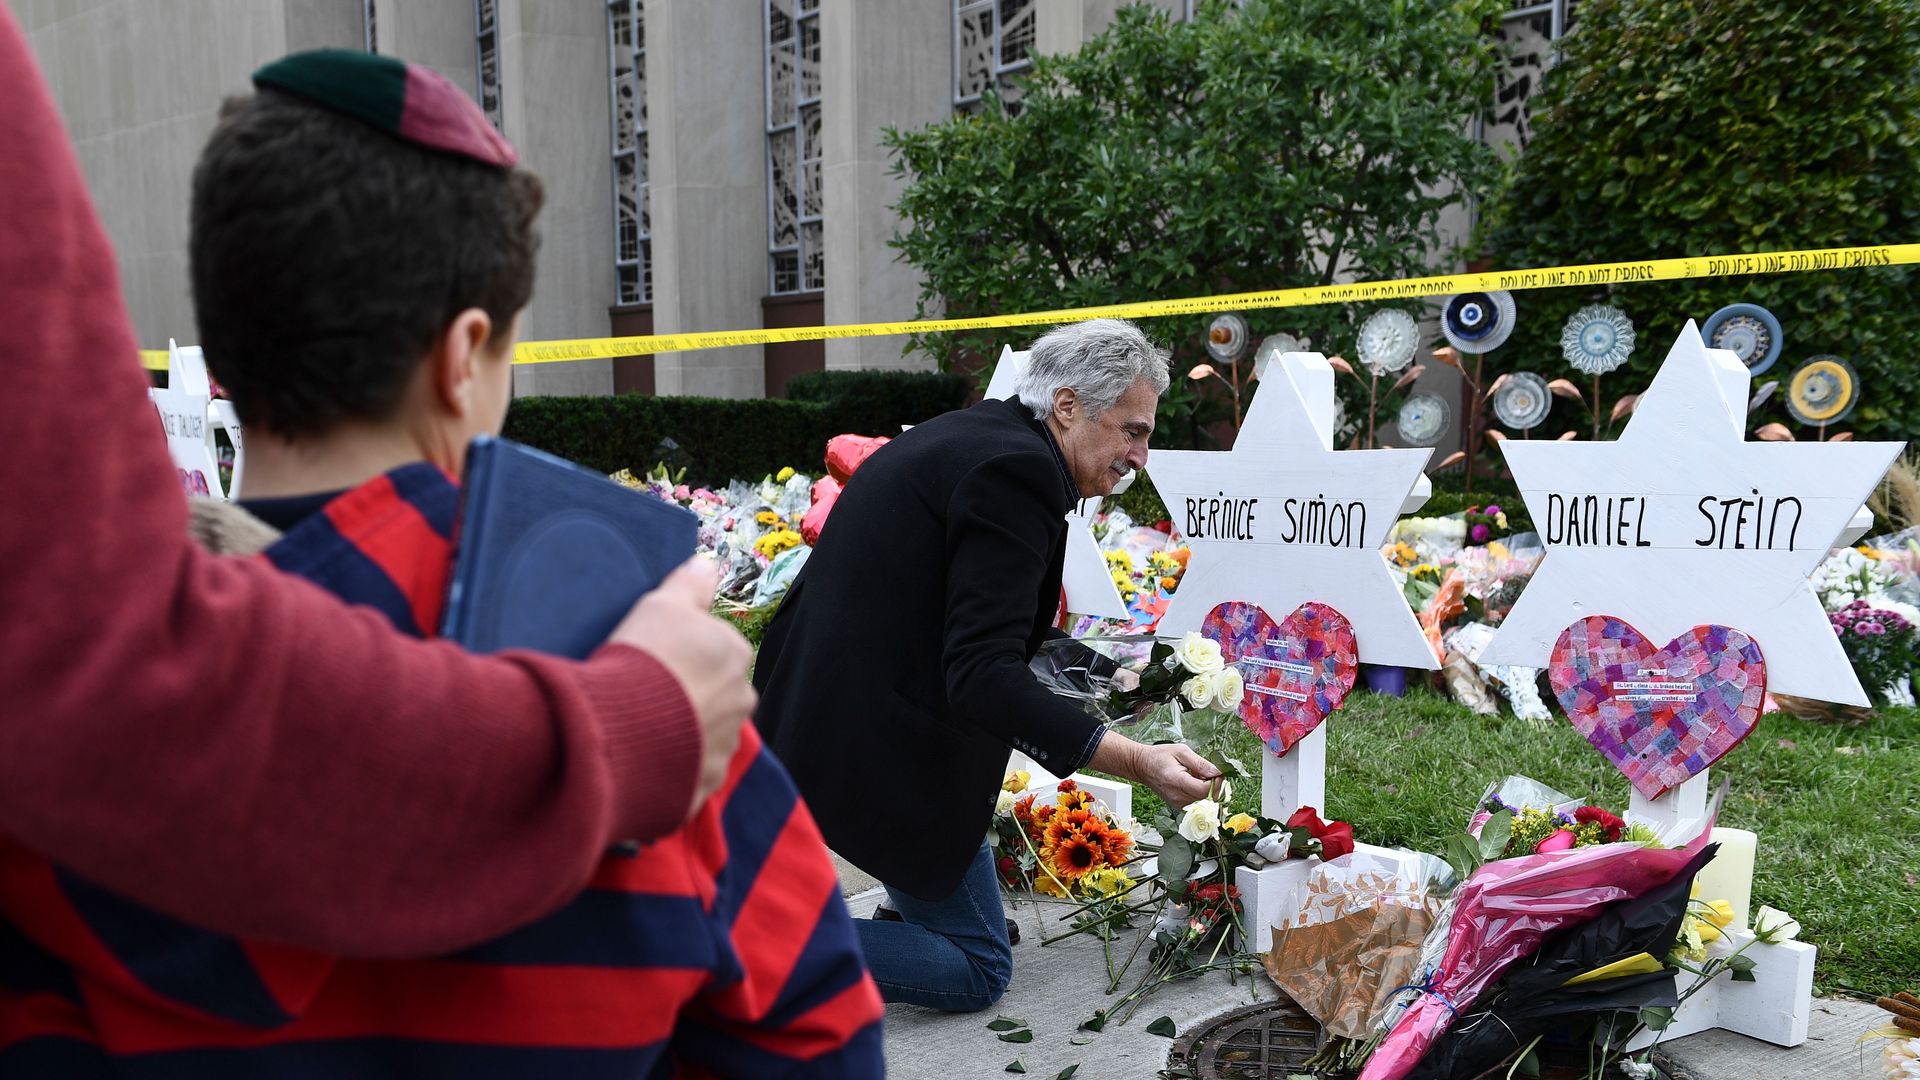 In this image, a man lays flowers at memorials for shooting victims, outside.